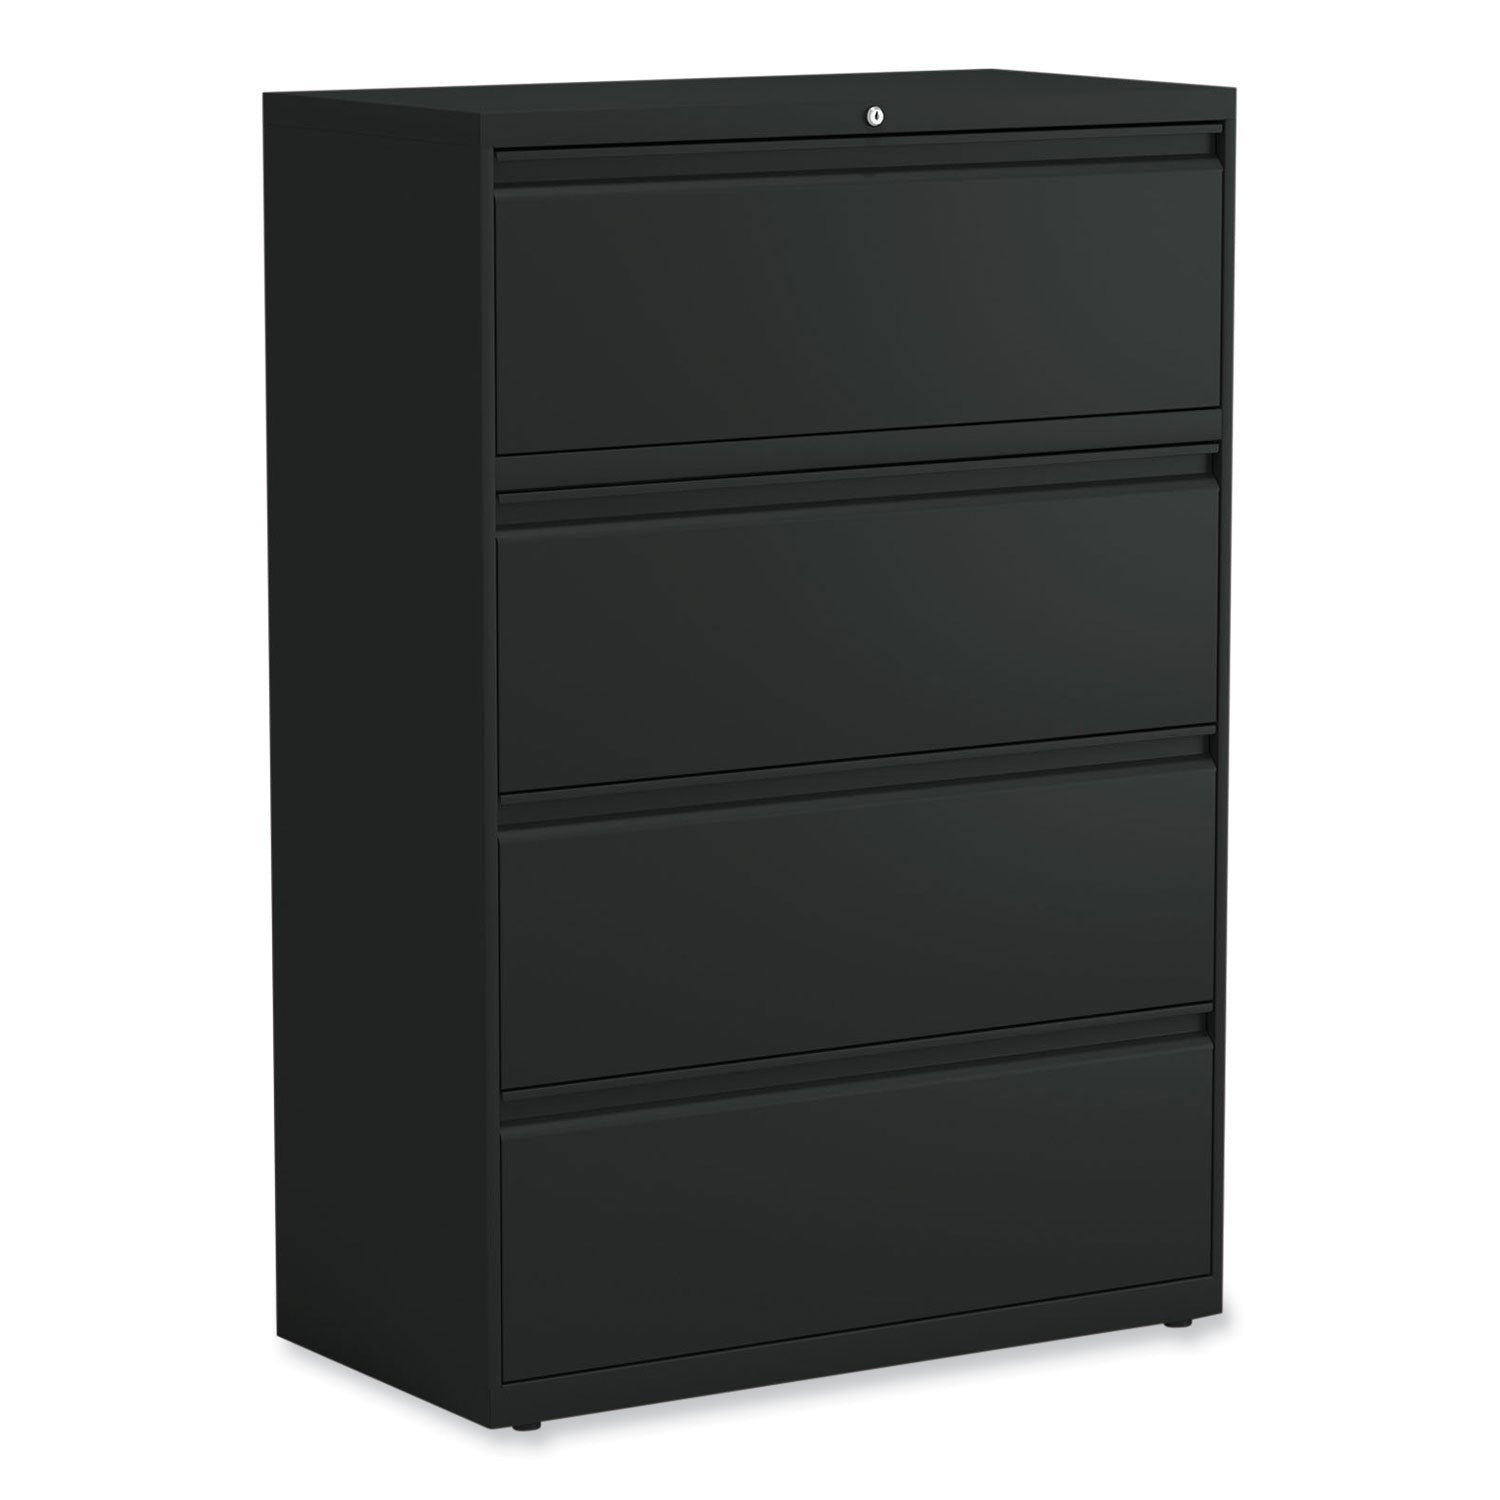 lateral-file-4-legal-letter-size-file-drawers-black-36-x-1863-x-525_alehlf3654bl - 1